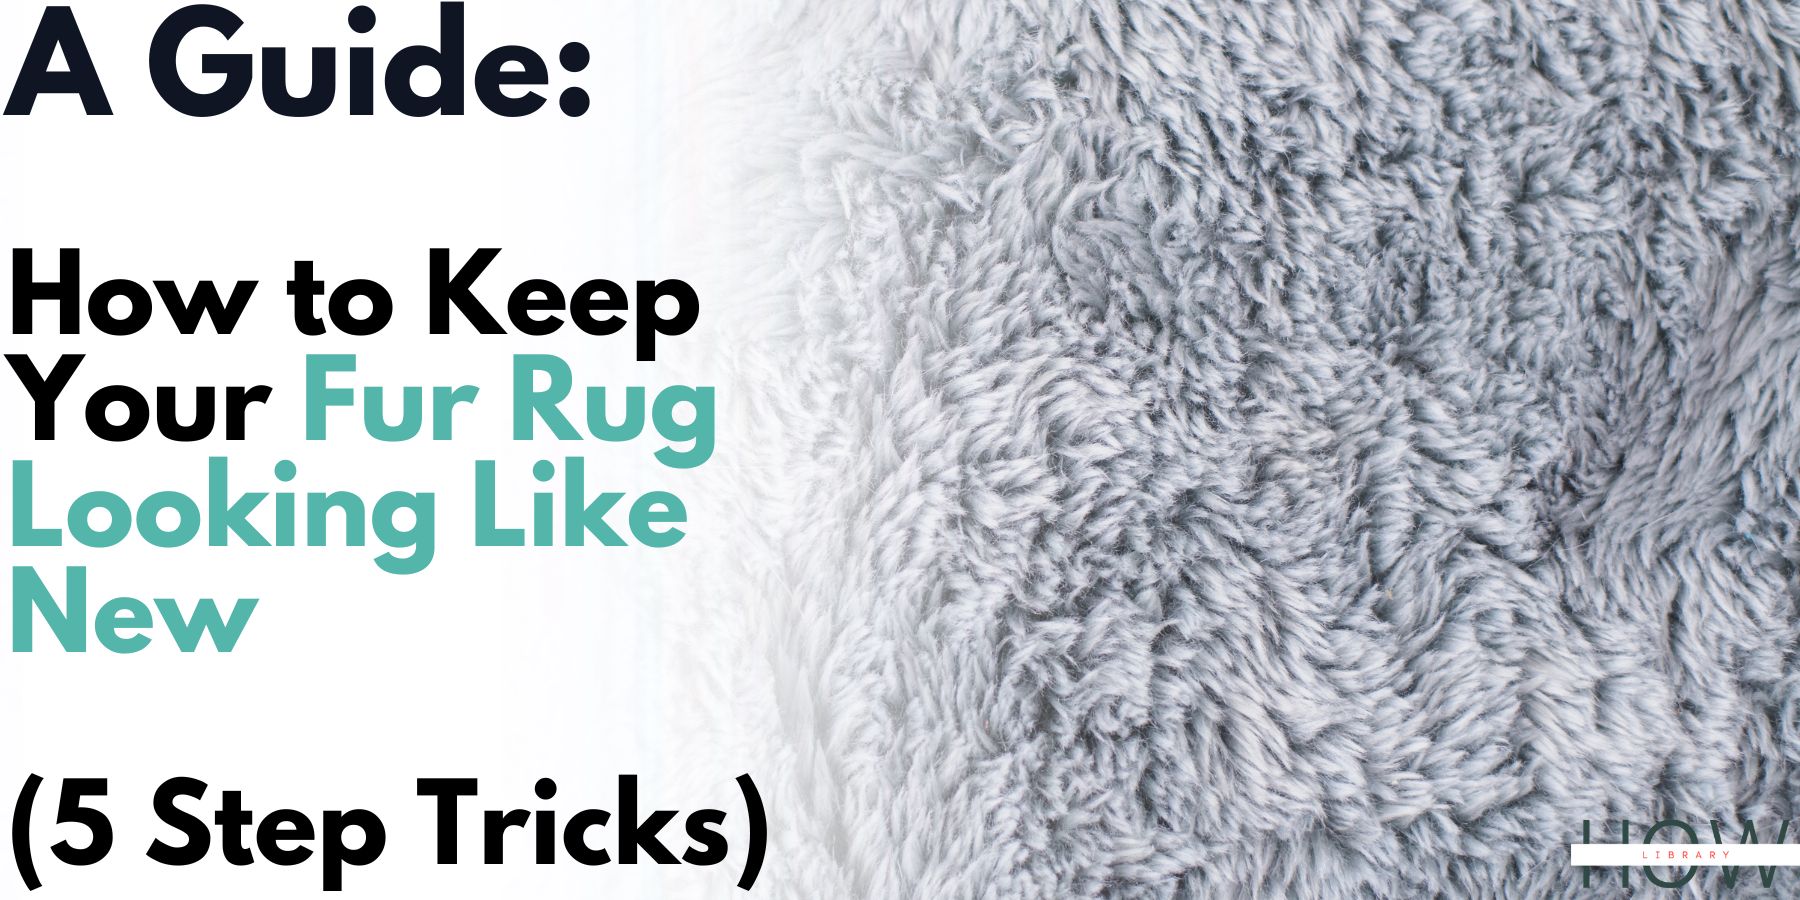 How to Keep Your Fur Rug Looking Like New